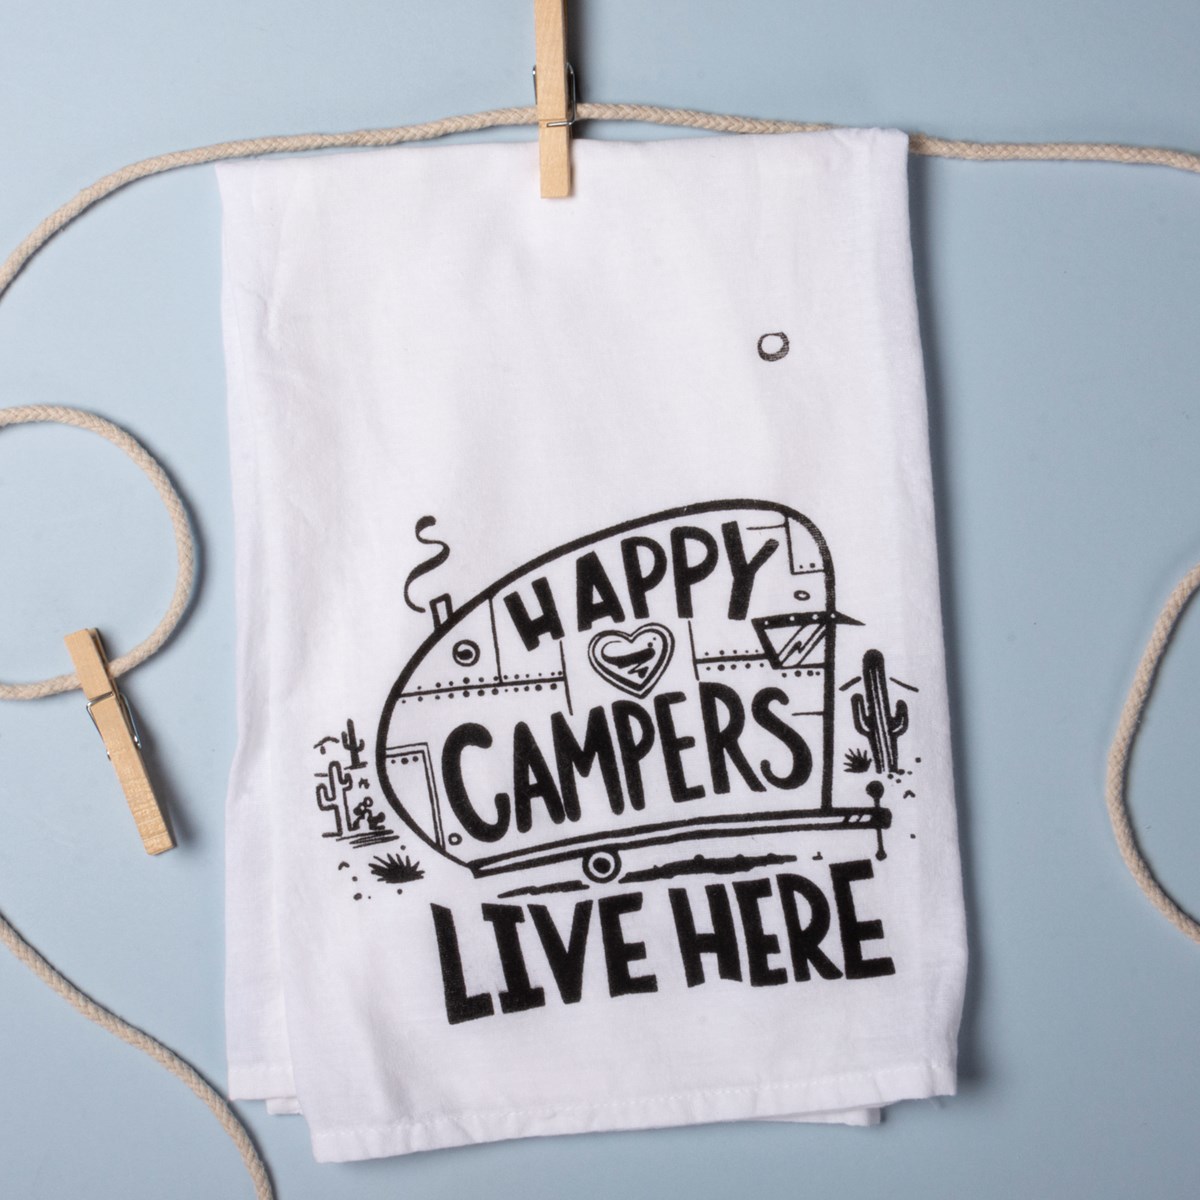 Happy Campers Live Here Kitchen Towel - Cotton